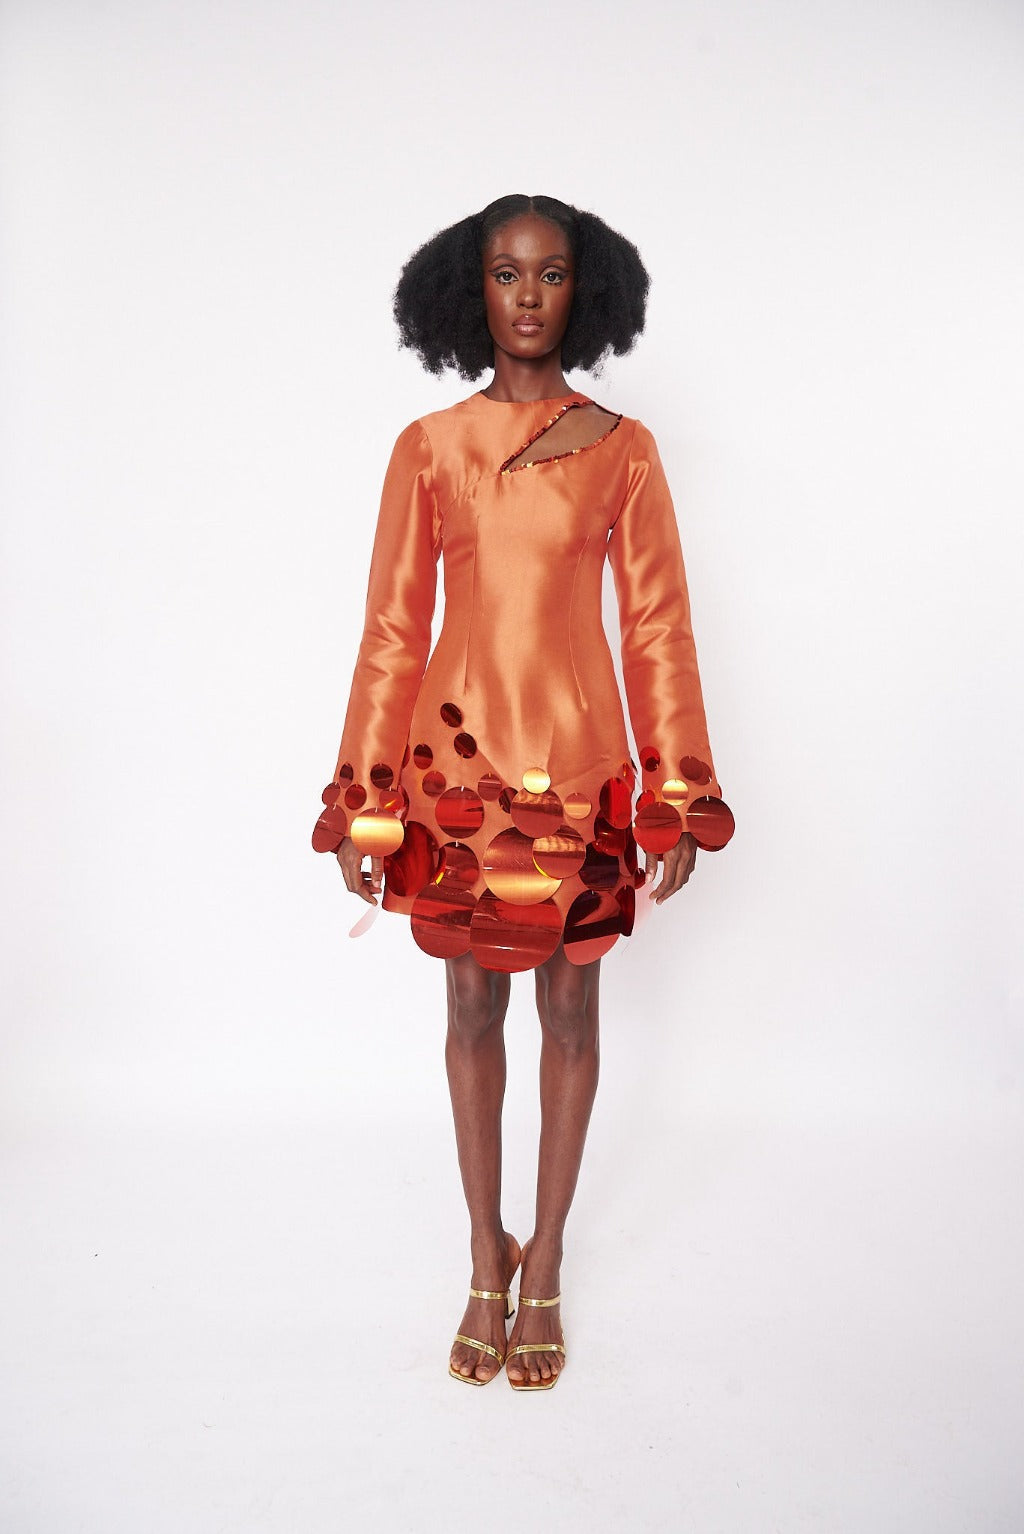 A model wearing an Orange mini dress with side cut-out detail at the neckline and embellished with sequins at the hem and sleeves